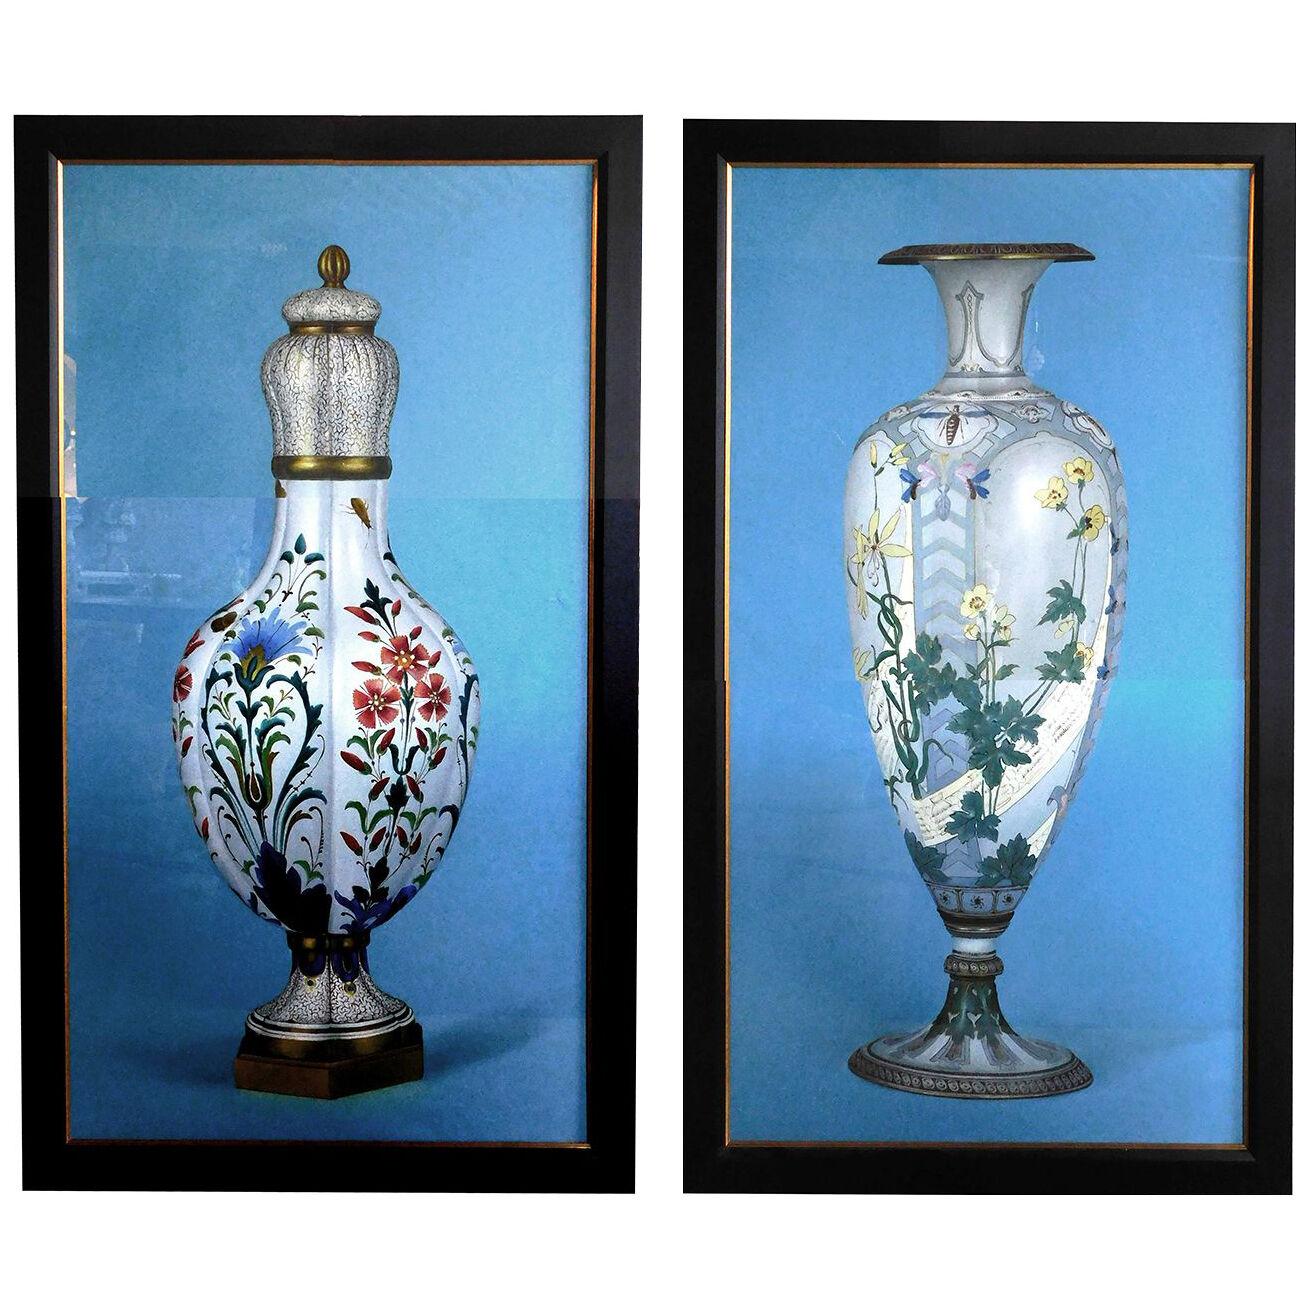 Oil on canvas; large pair of paintings depicting Chinese vases